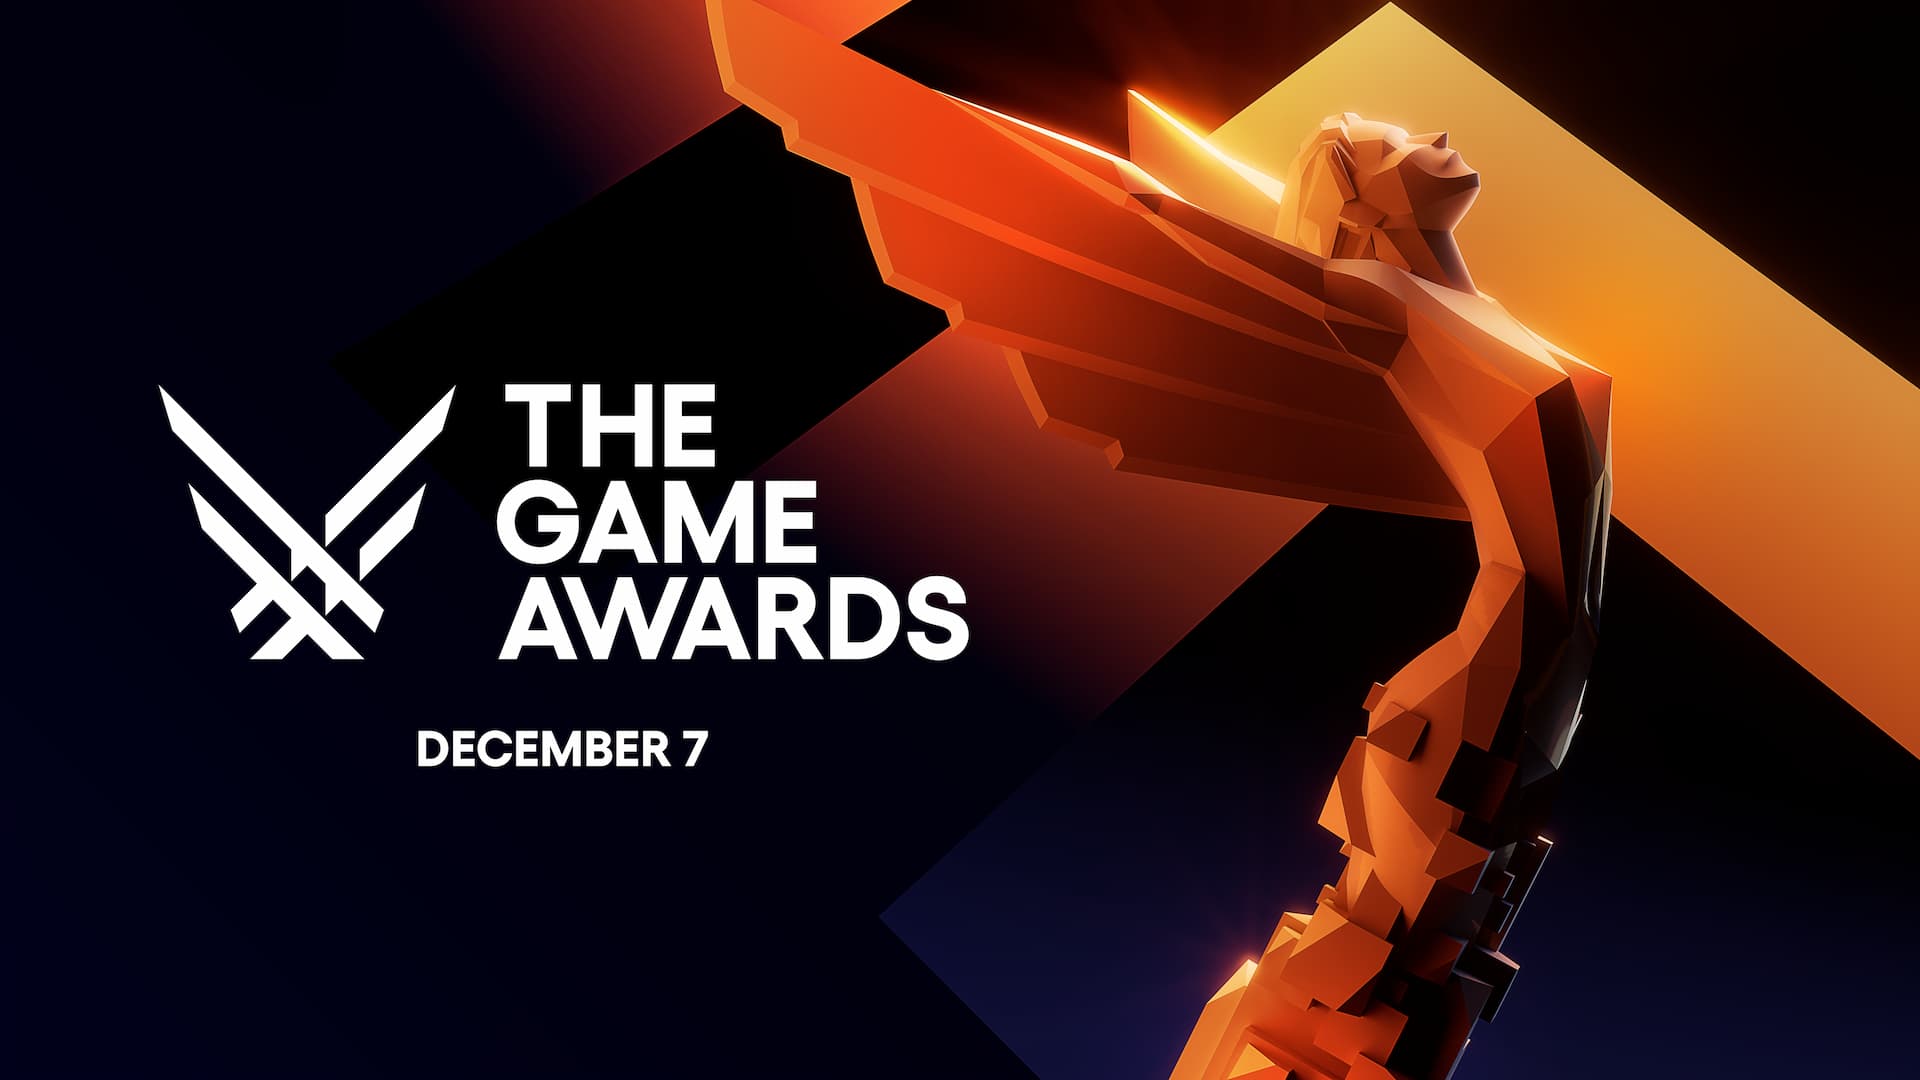 The Game Awards 2020 winners, announcements, & trailers